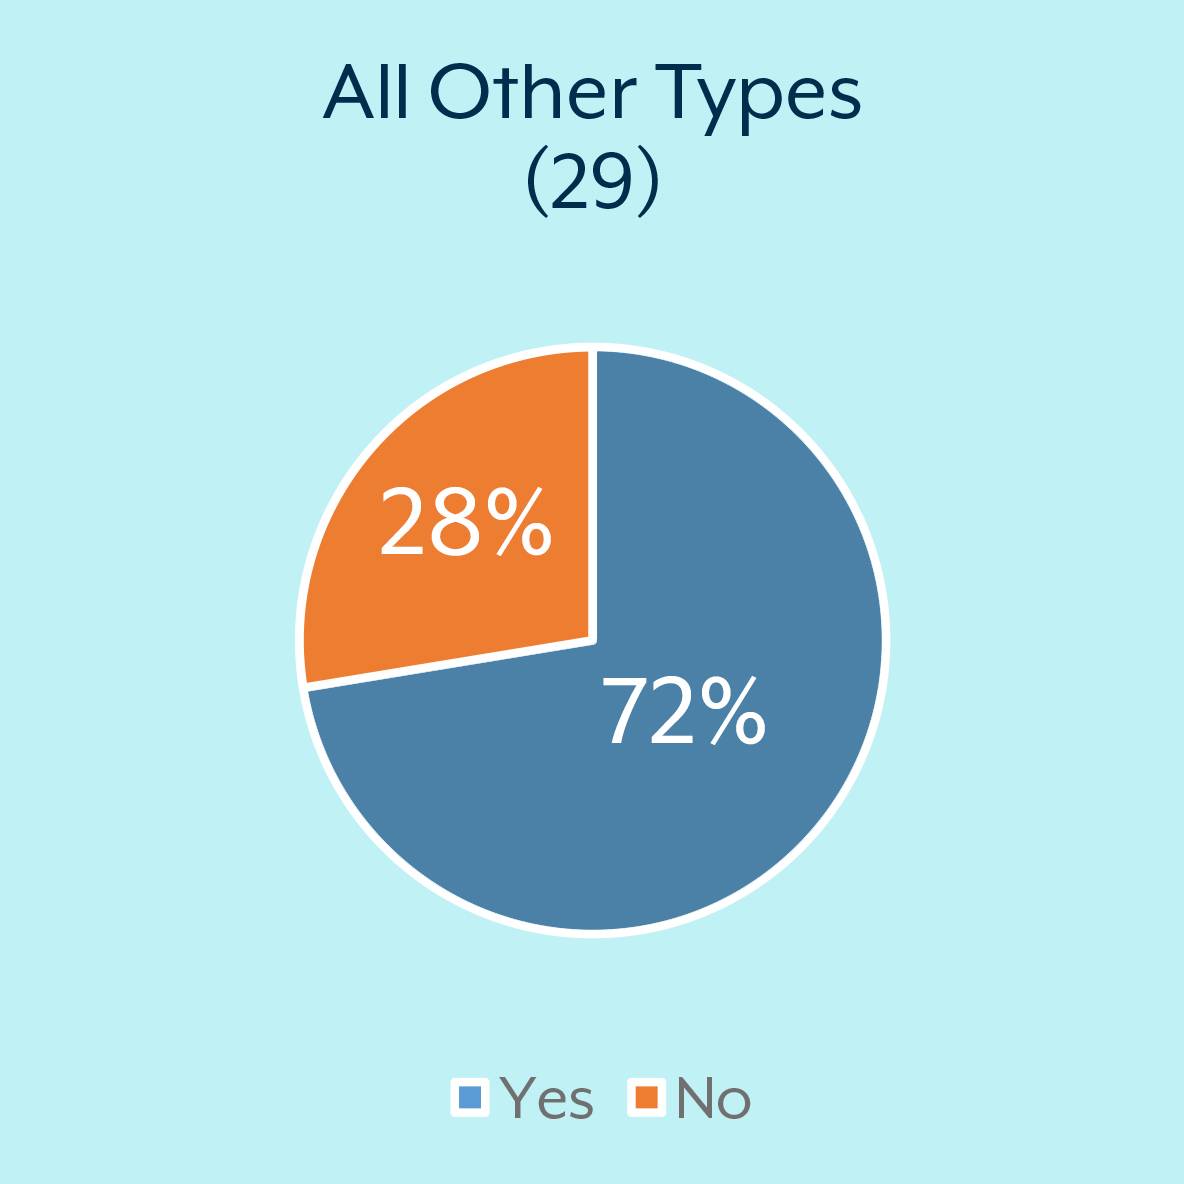 All Other Types: Yes = 72% No = 28%